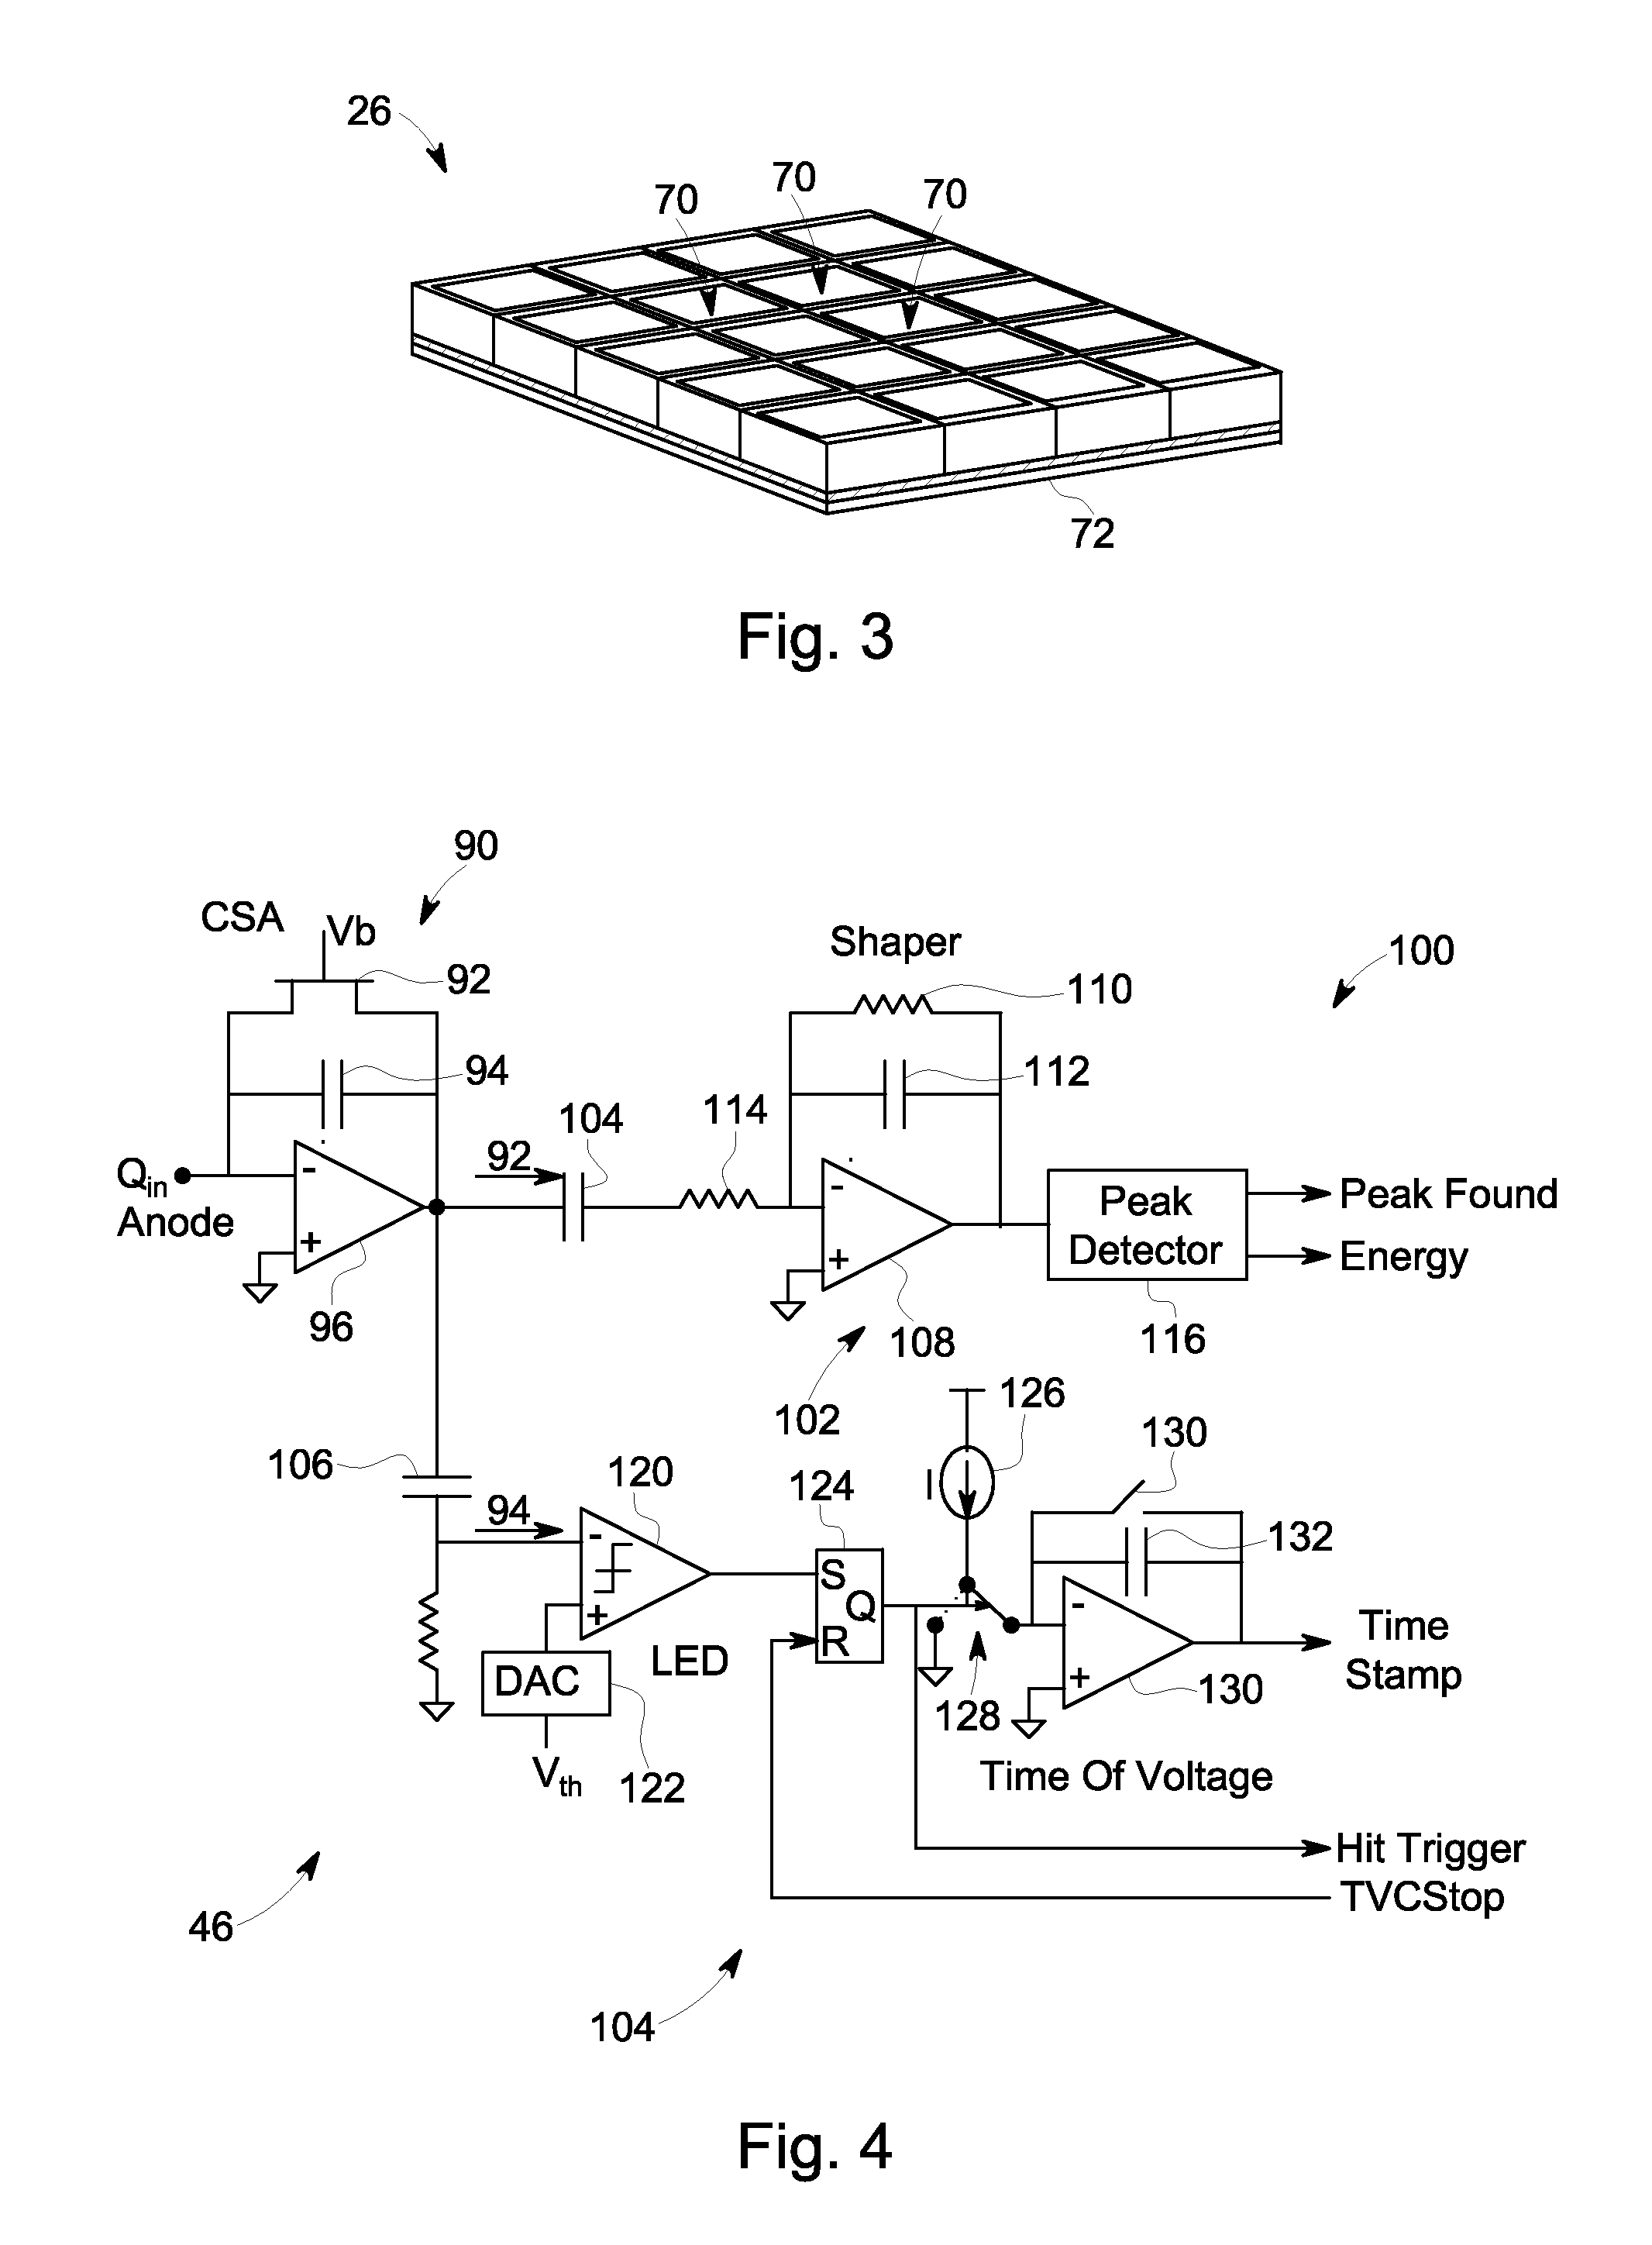 Systems and methods for generating control signals in radiation detector systems